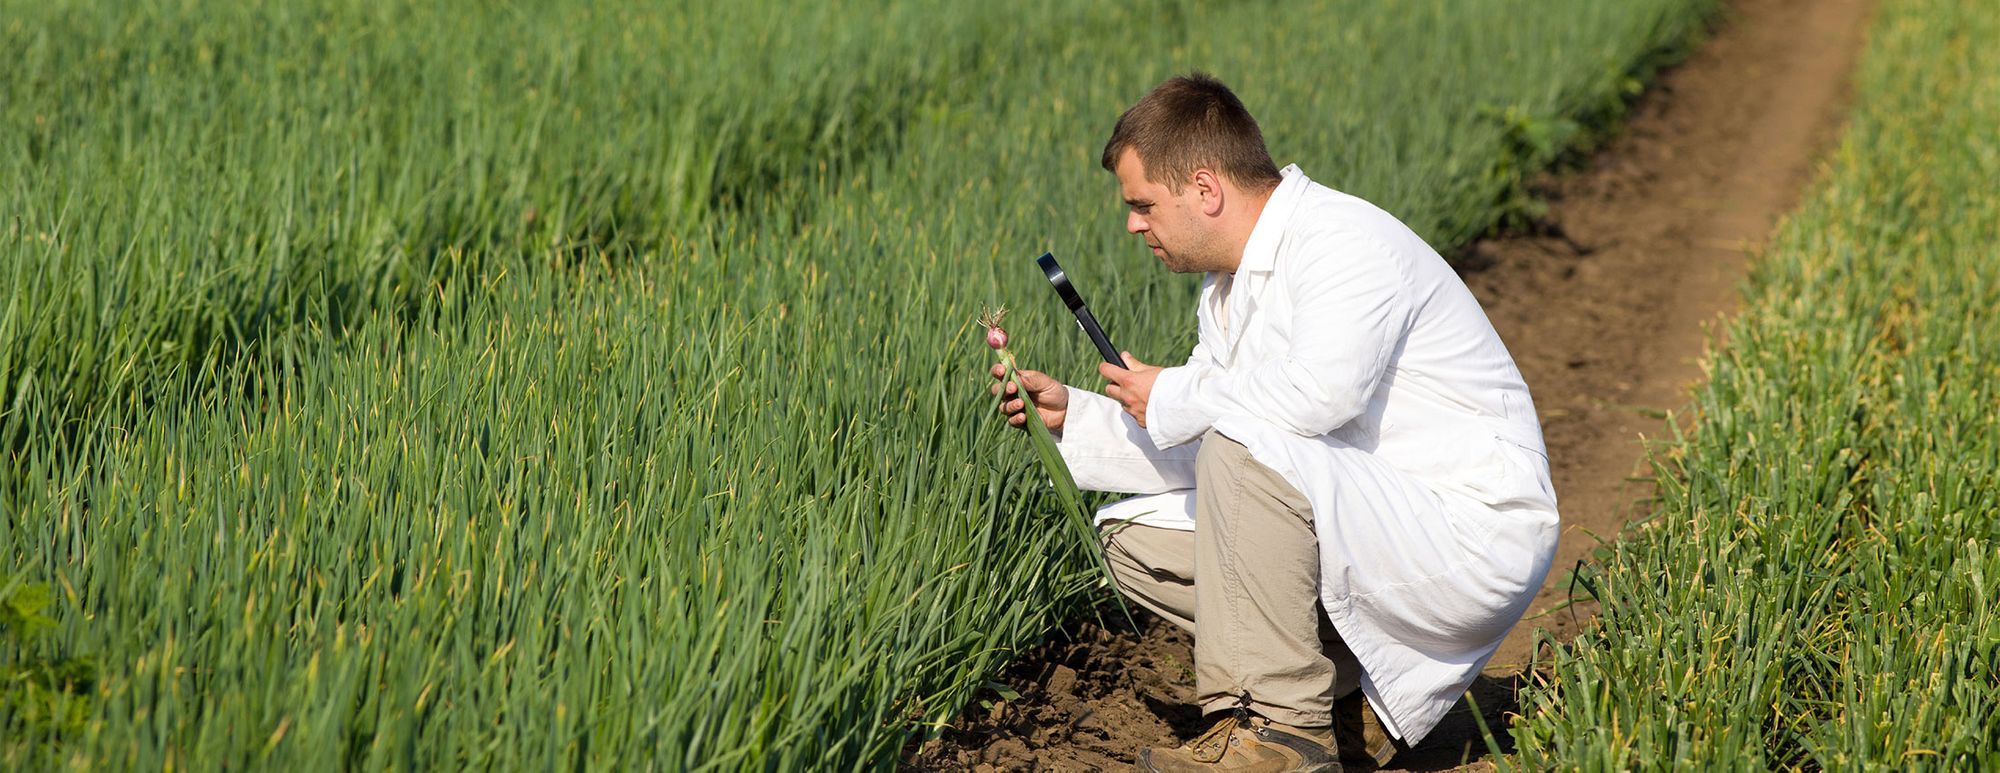 Super Cool Tools – Less Guesswork when Monitoring Plant and Soil Health